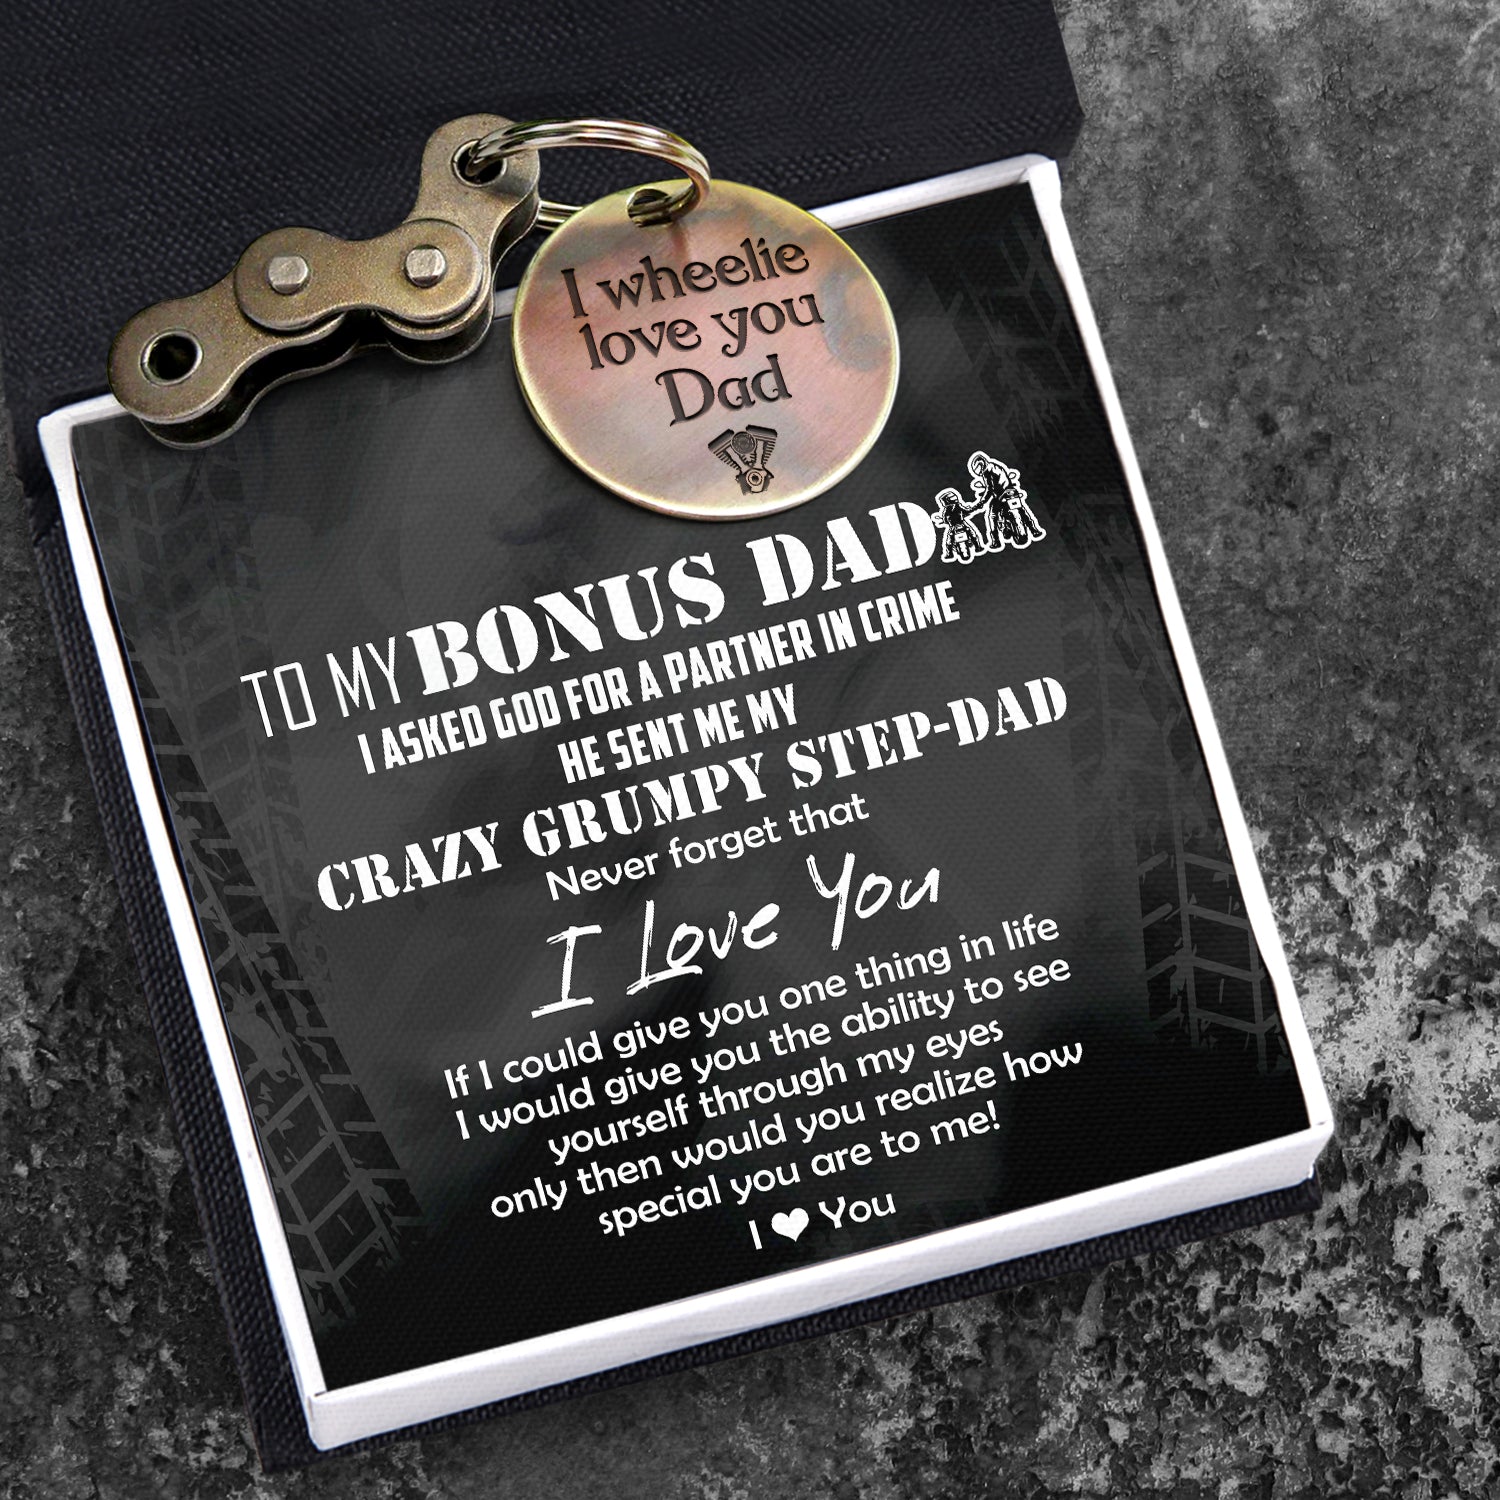 Motocross Keychain - To My Bonus Dad - How Special You Are To Me - Ukgkbf18004